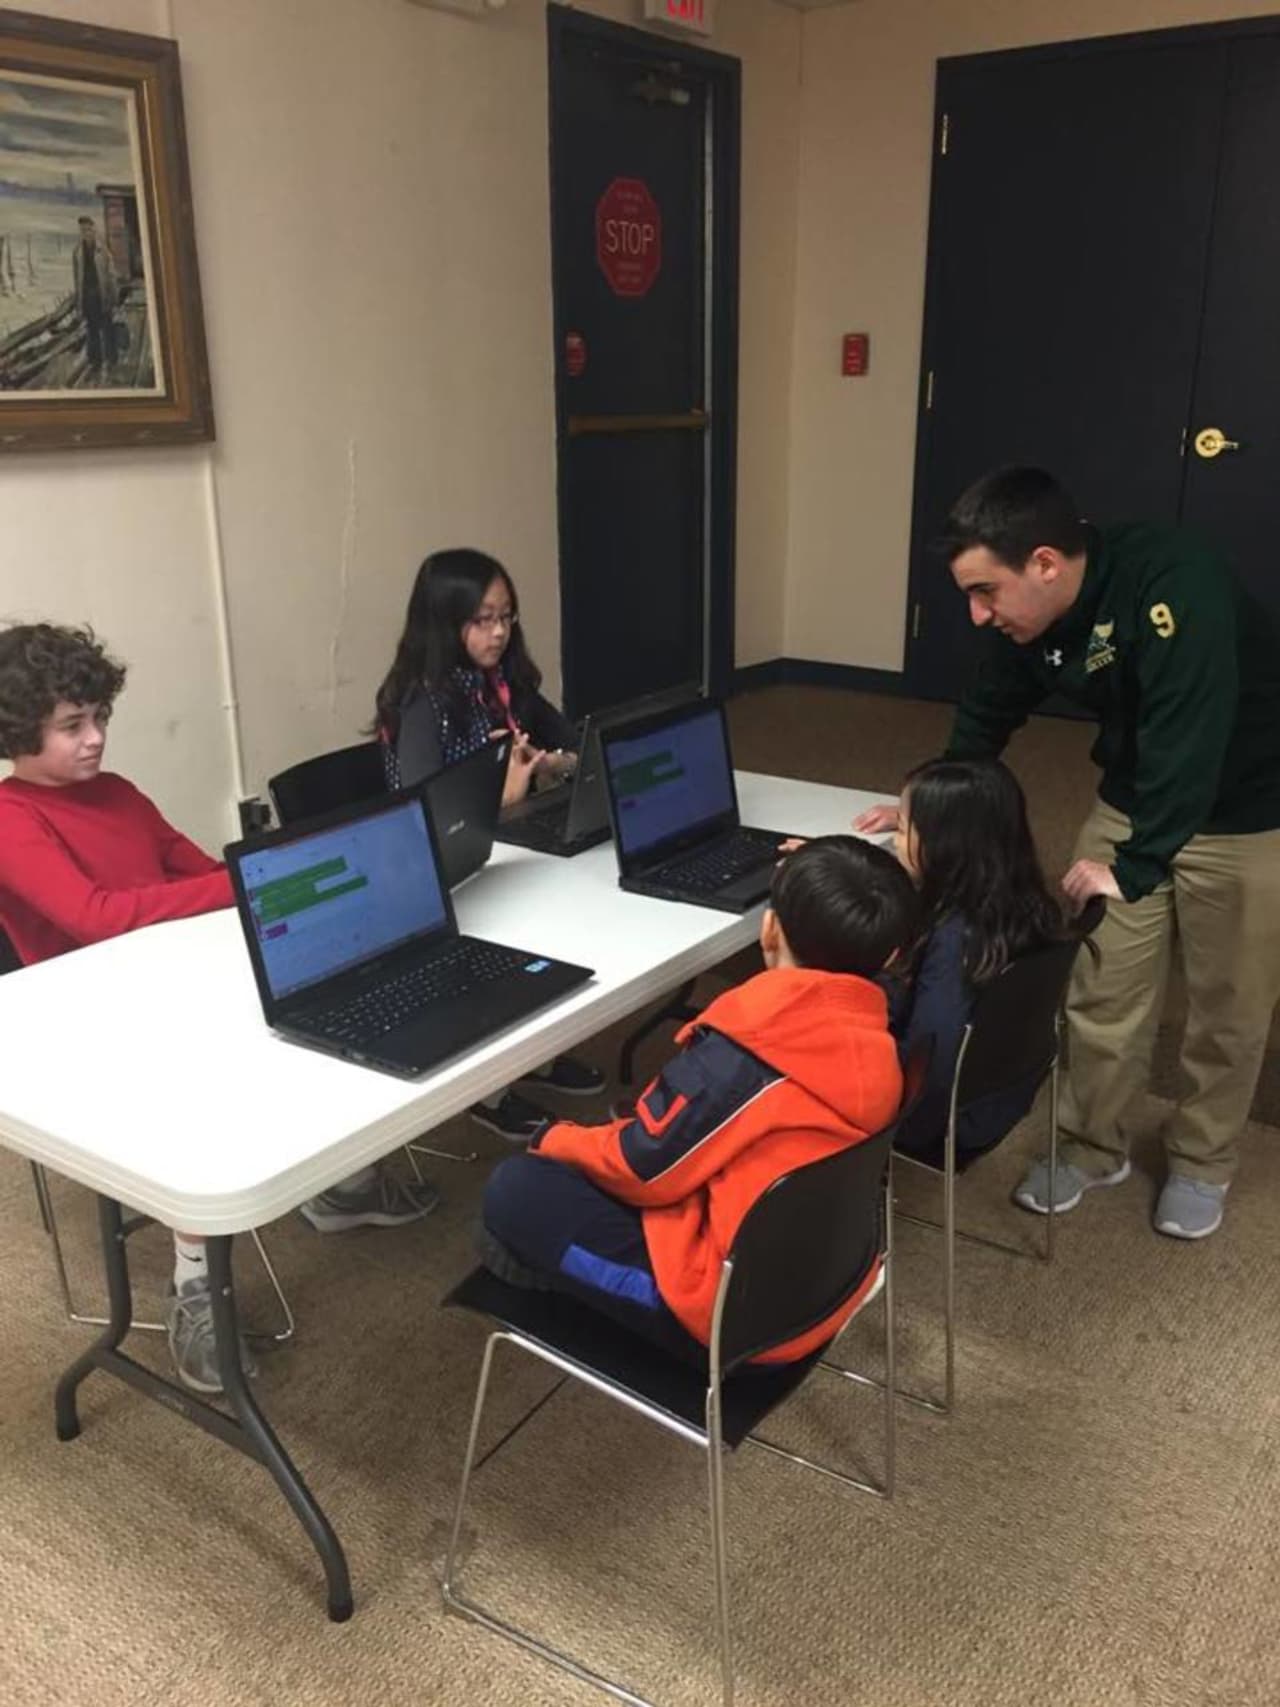 The Bergenfield Public Library will host the program Tech Roots Academy: Intro to Computer Programming 101 (Gr 3-8) on Thursday, from 5:30 - 6:30 p.m.